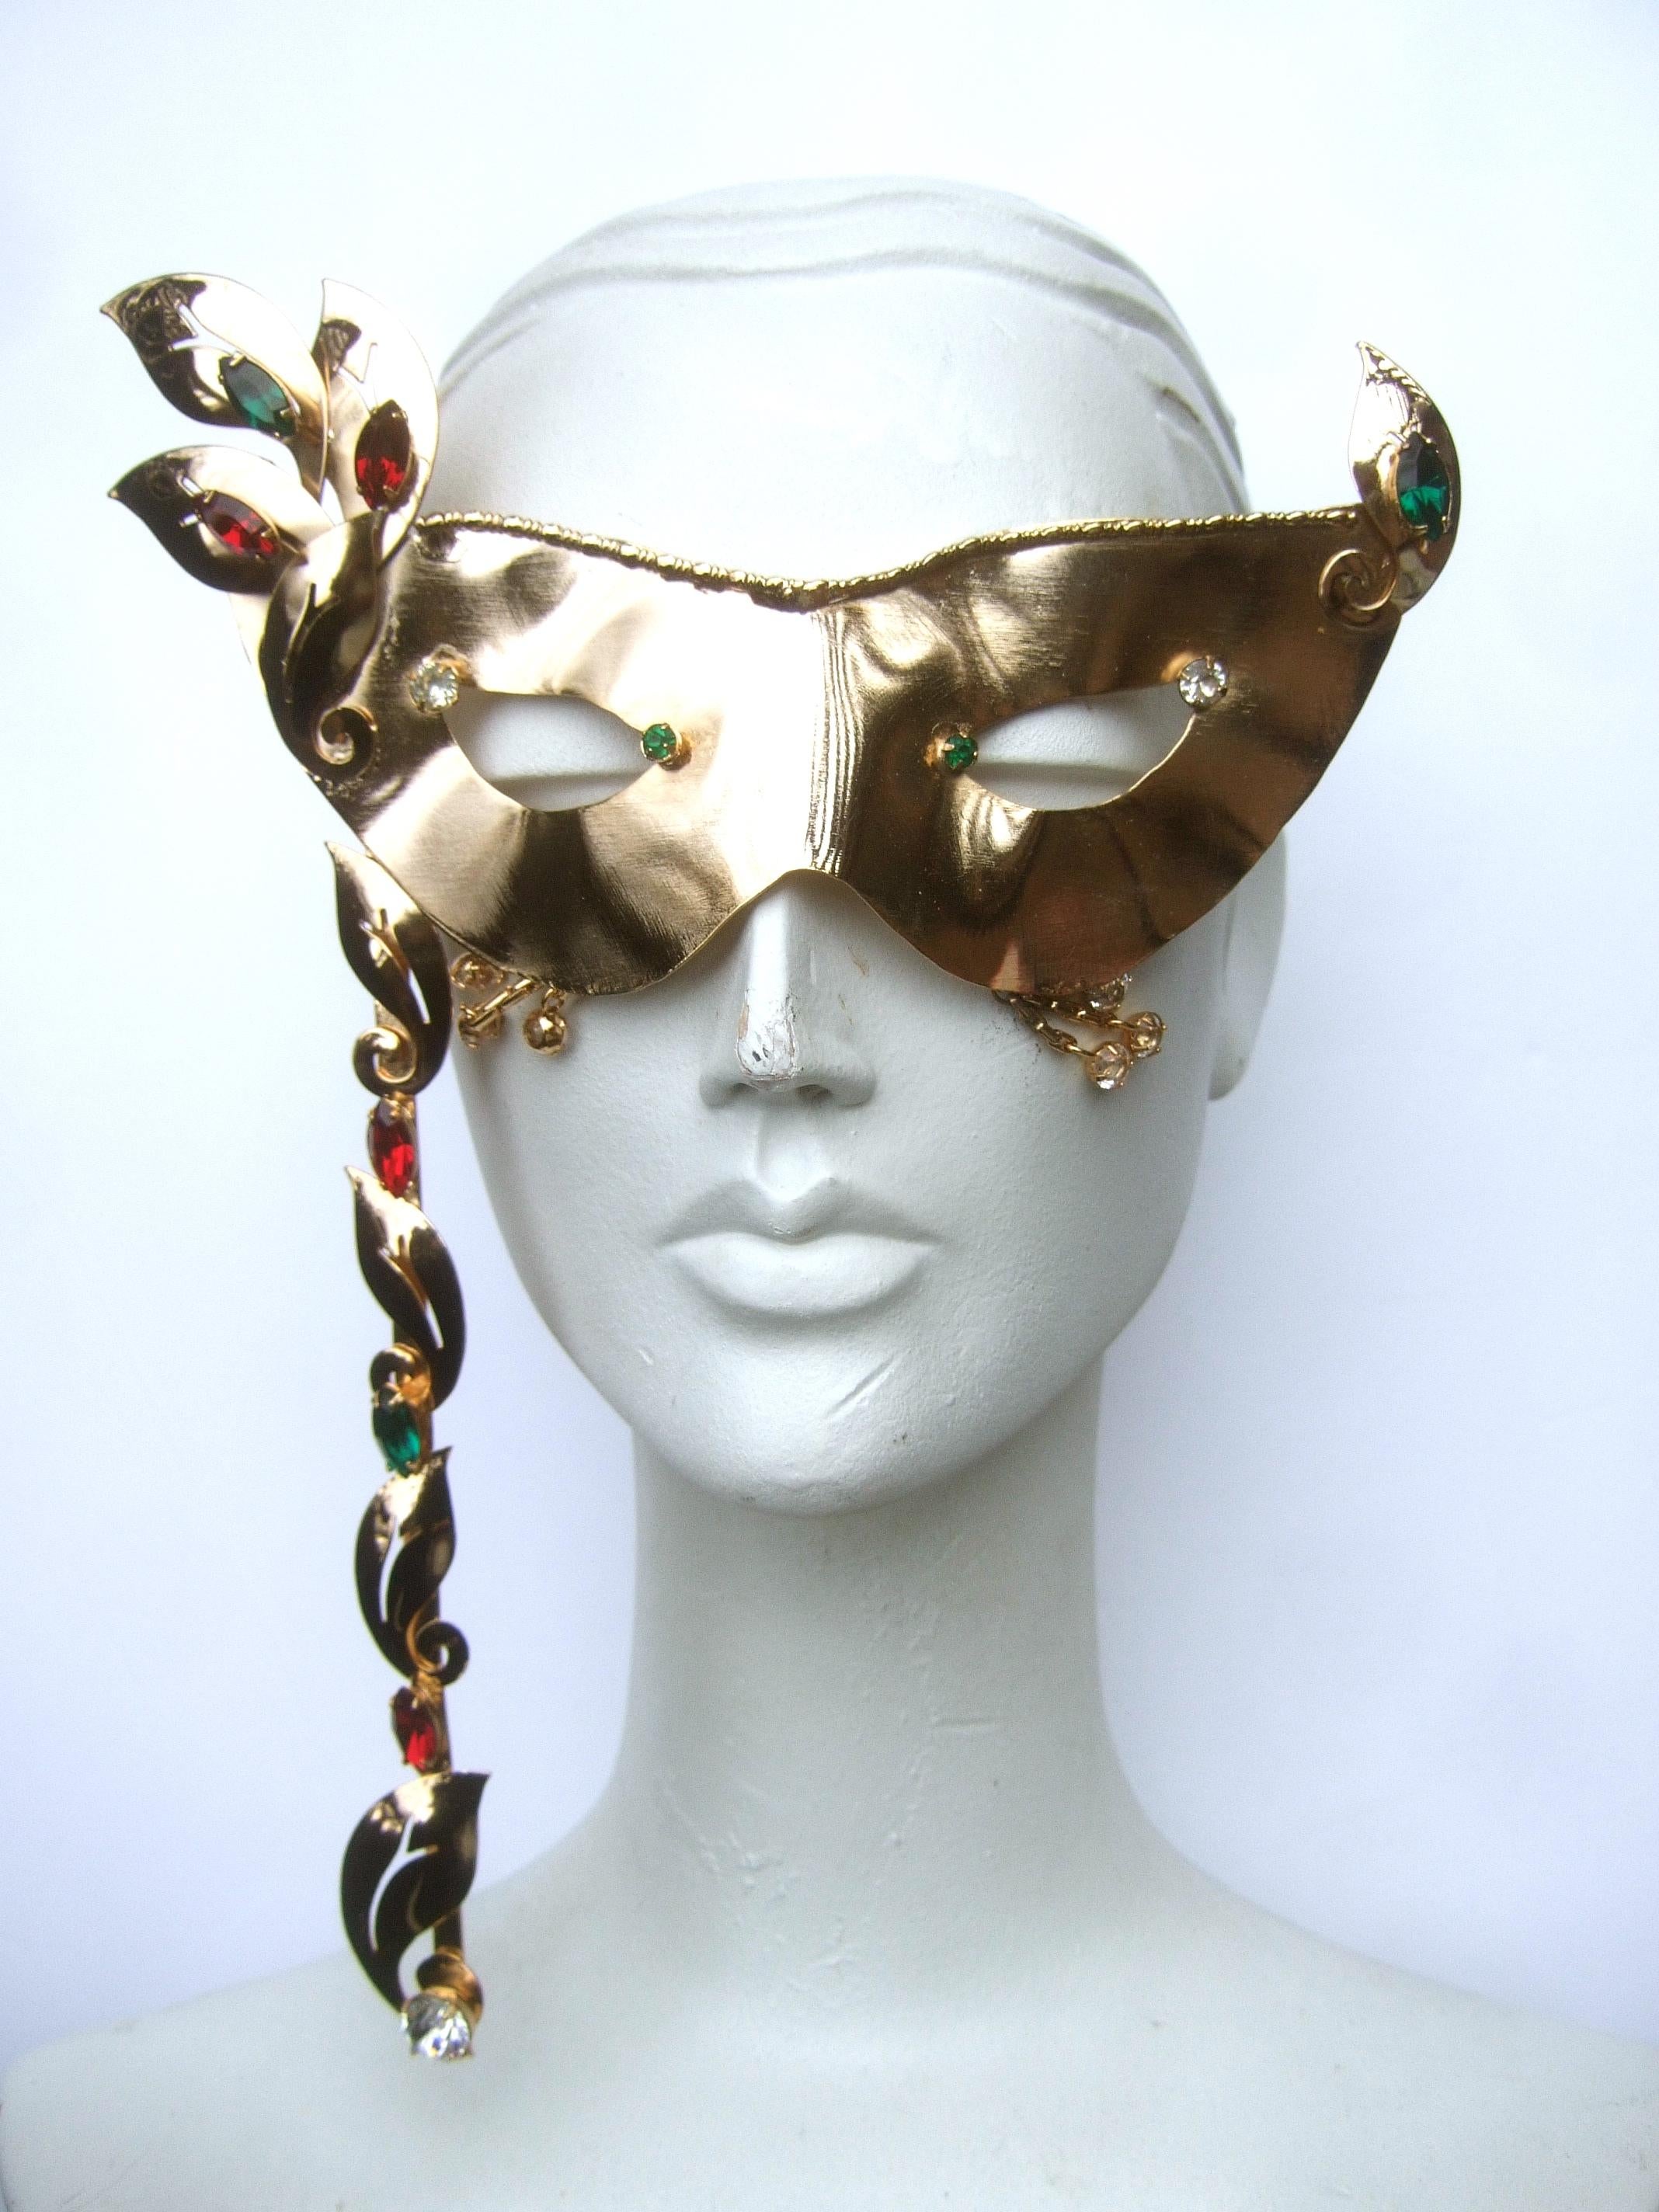 Rare Limited Edition Gilt Metal Mardi Gras Crystal Jeweled Mask by Joseff c 2013 For Sale 3